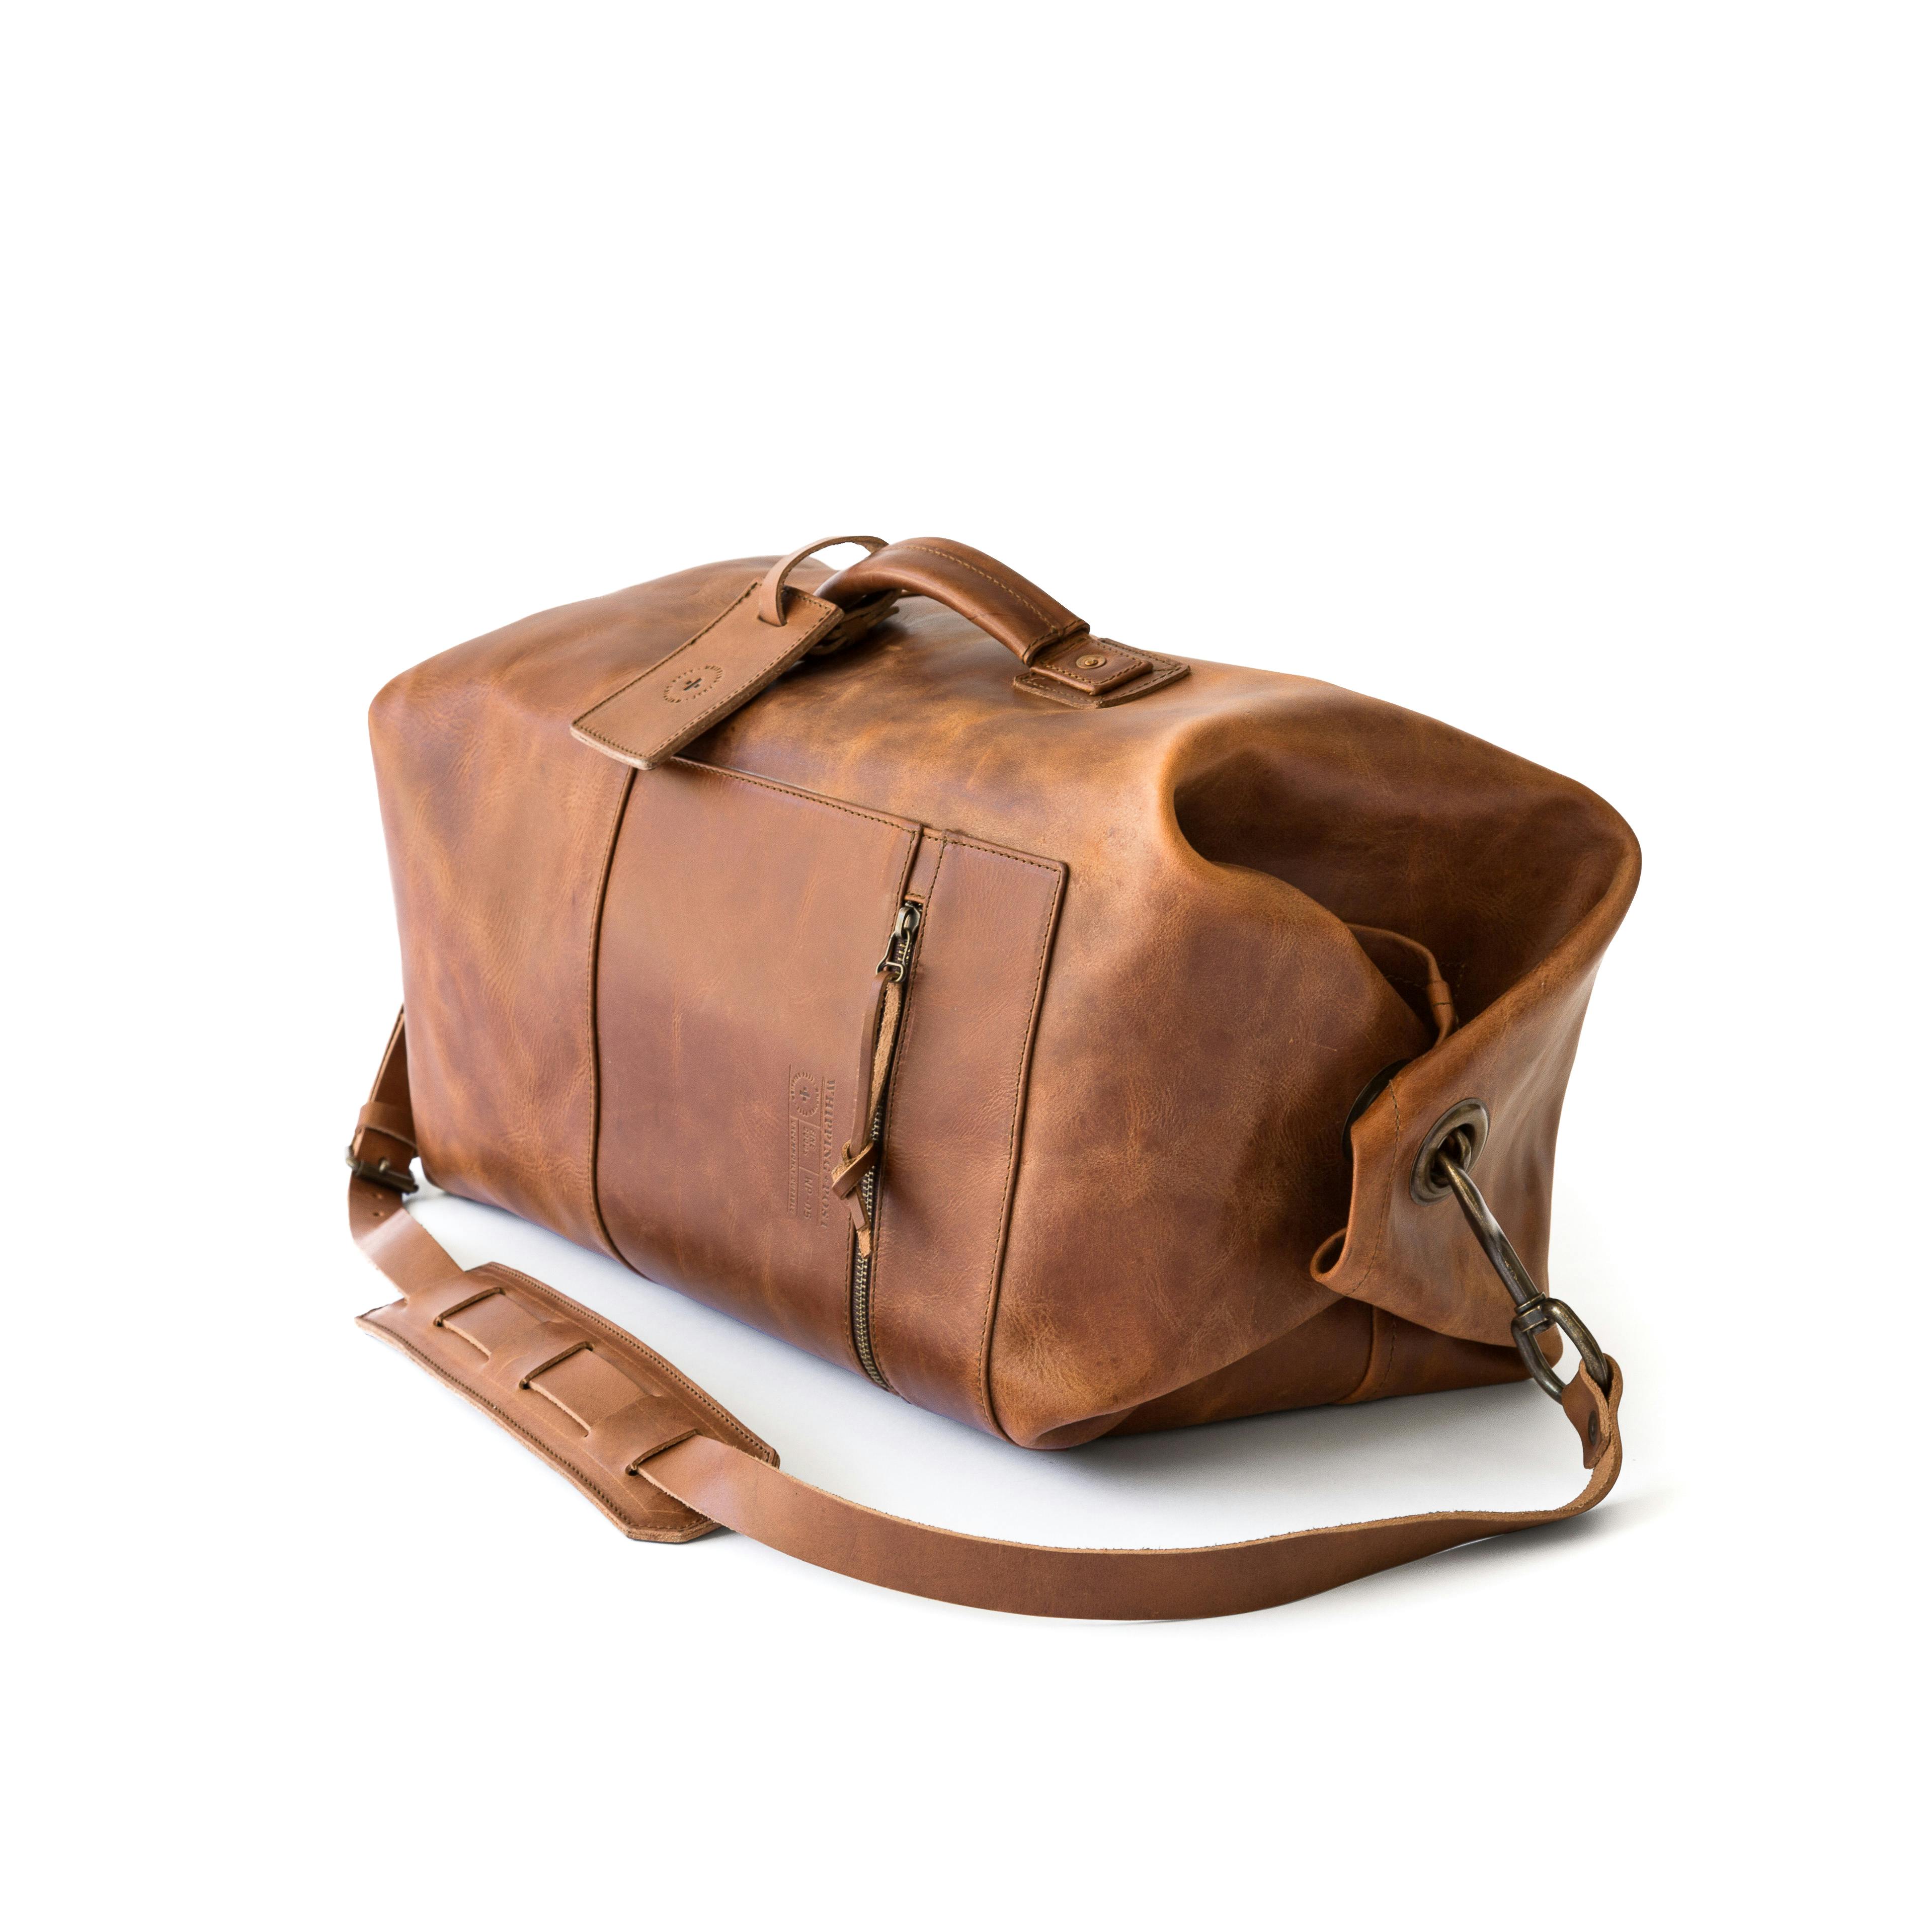 Leather Military Duffle Bag Chestnut - Linden Is Enough